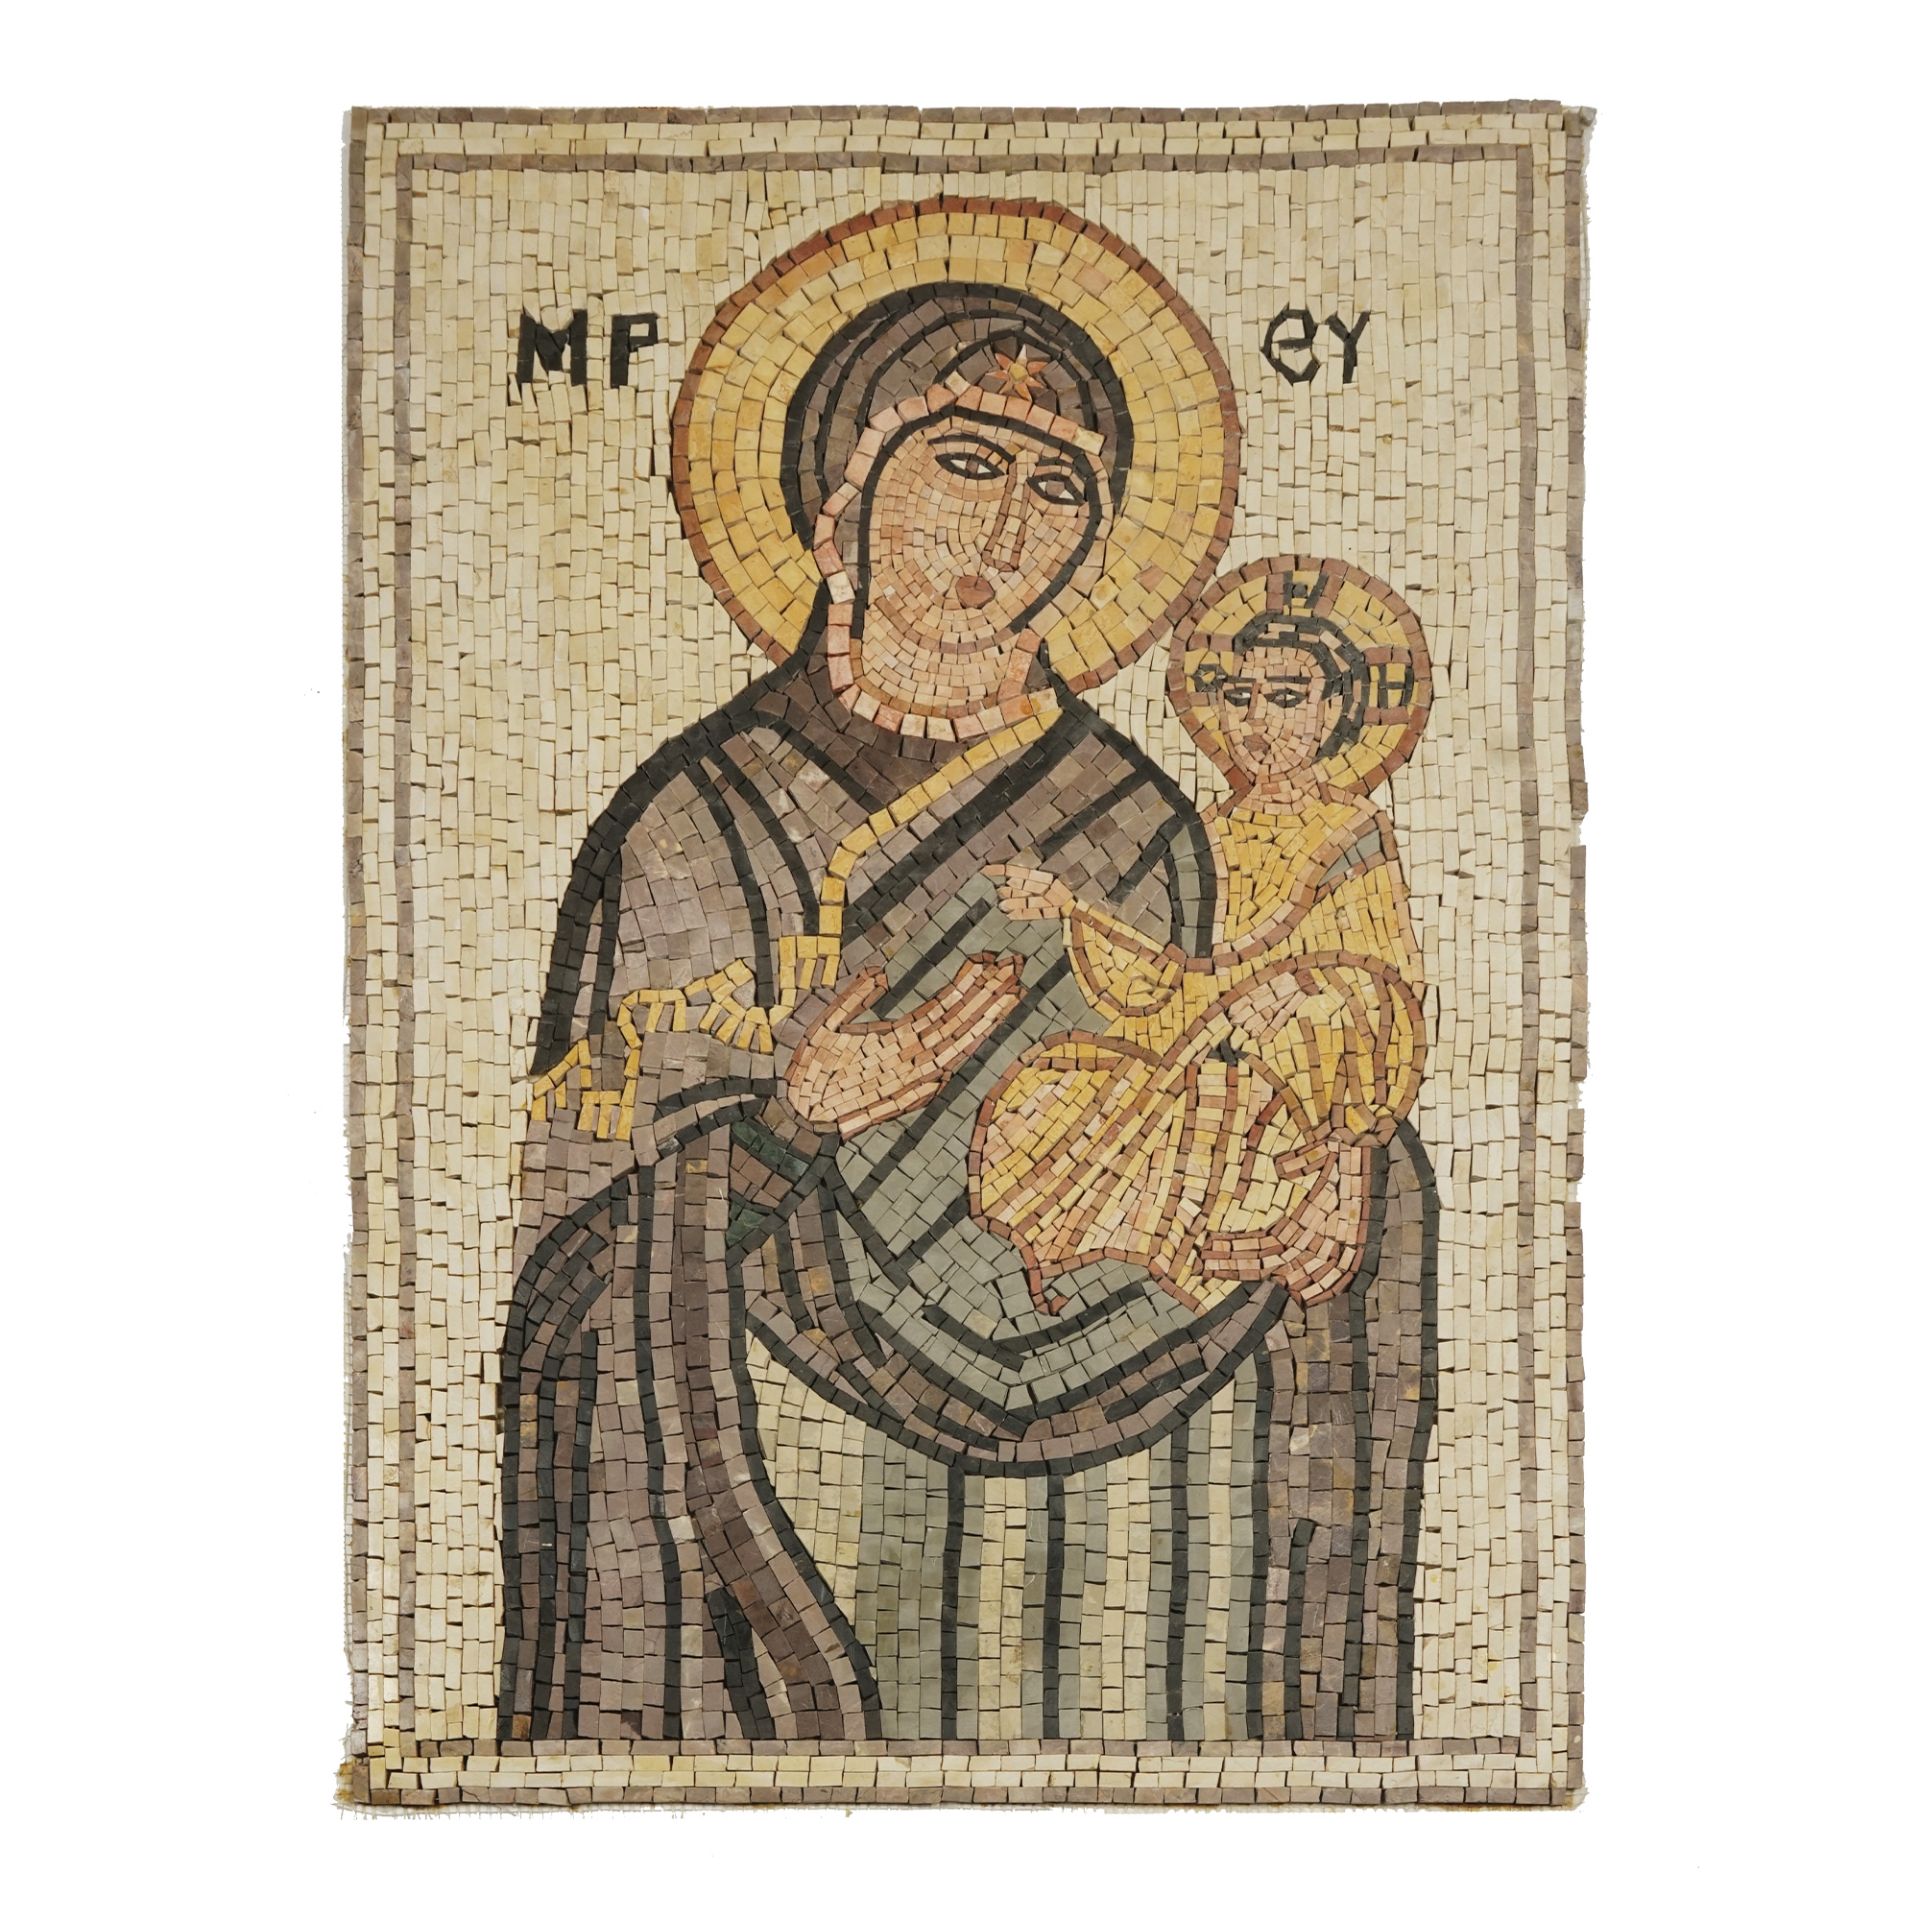 A marble mosaic representing The Virgin and Child